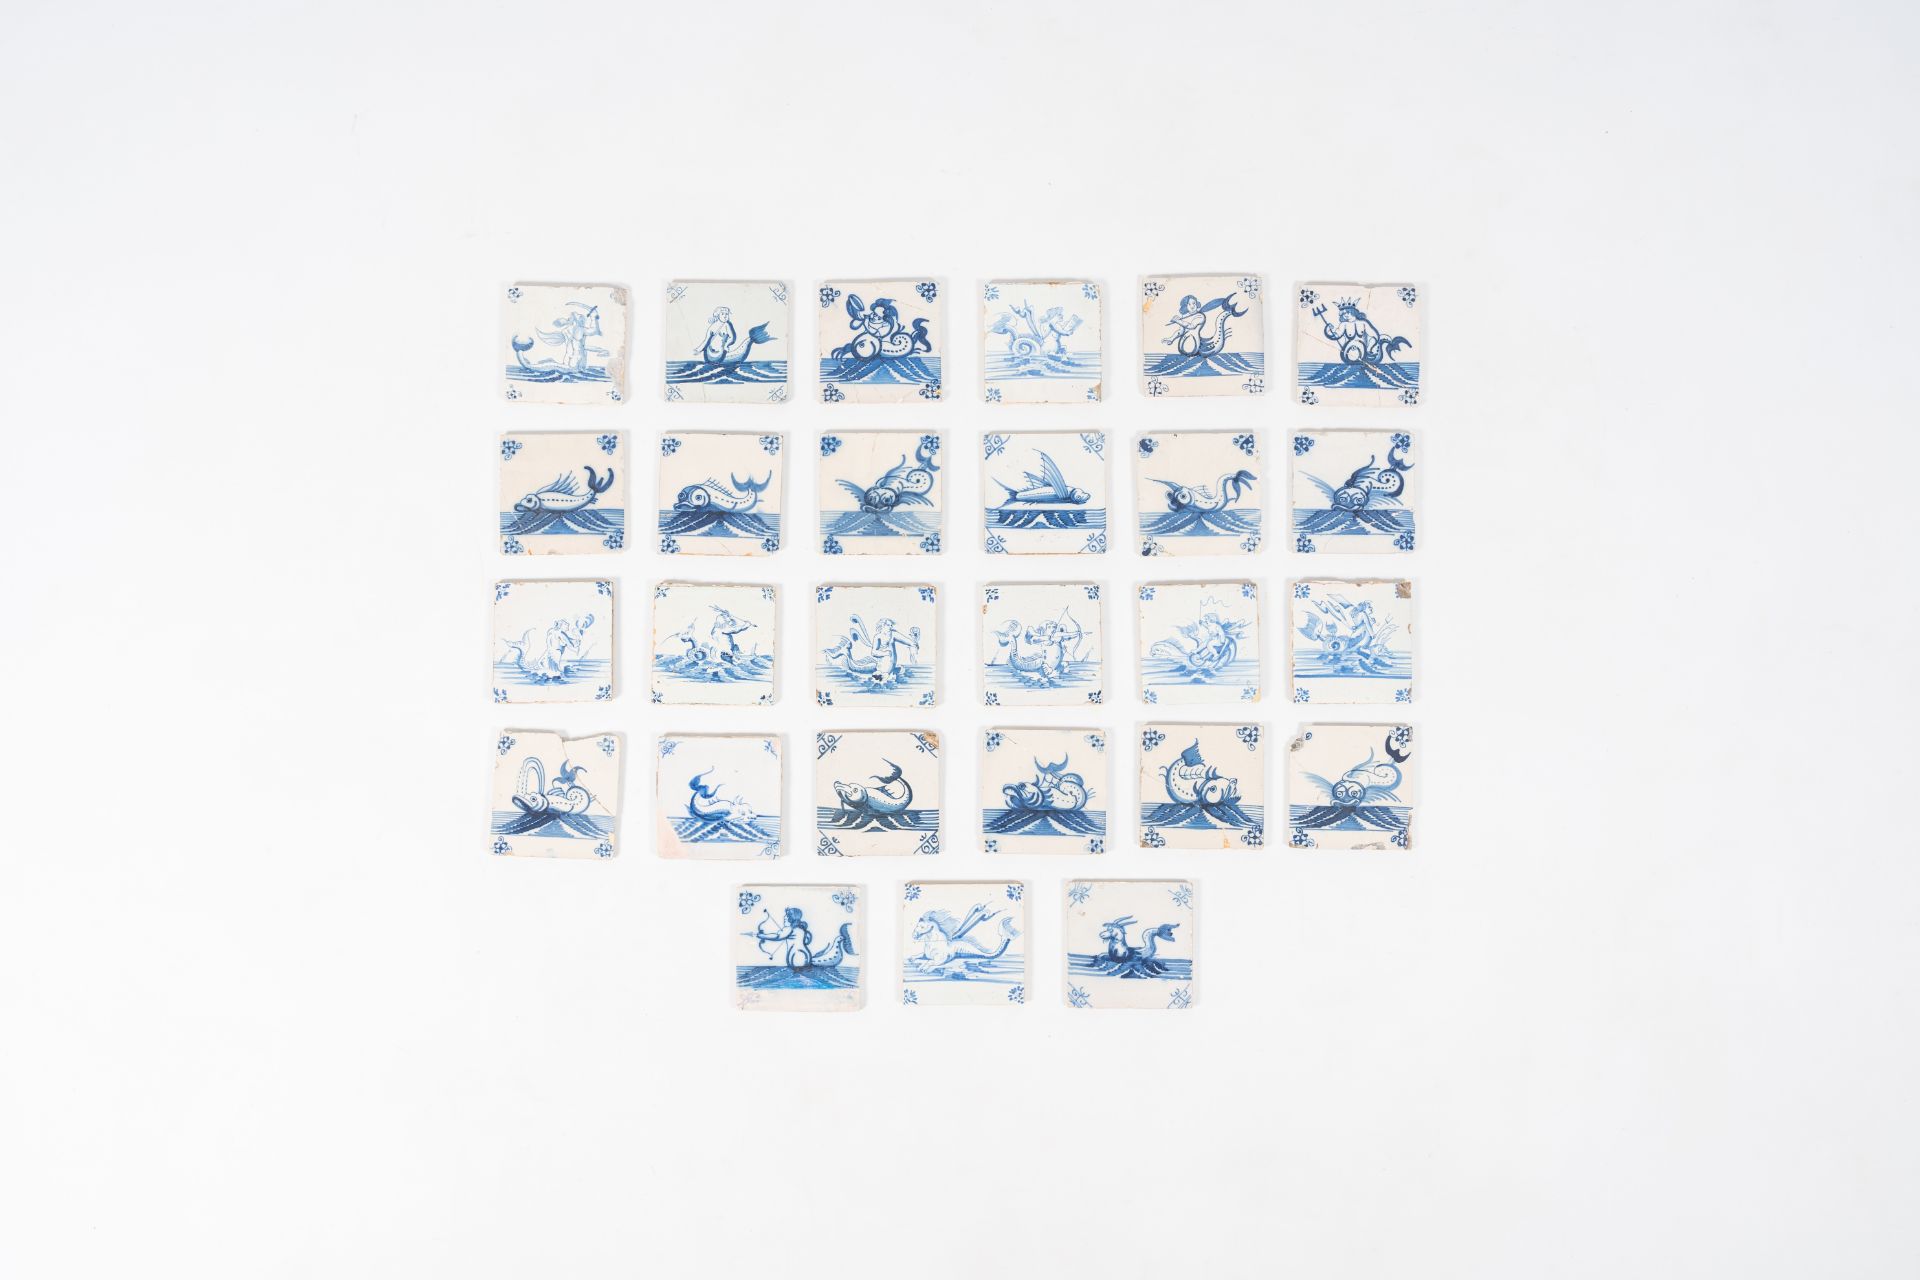 27 blue and white Dutch Delft tiles with sea monsters, 17th/19th C.